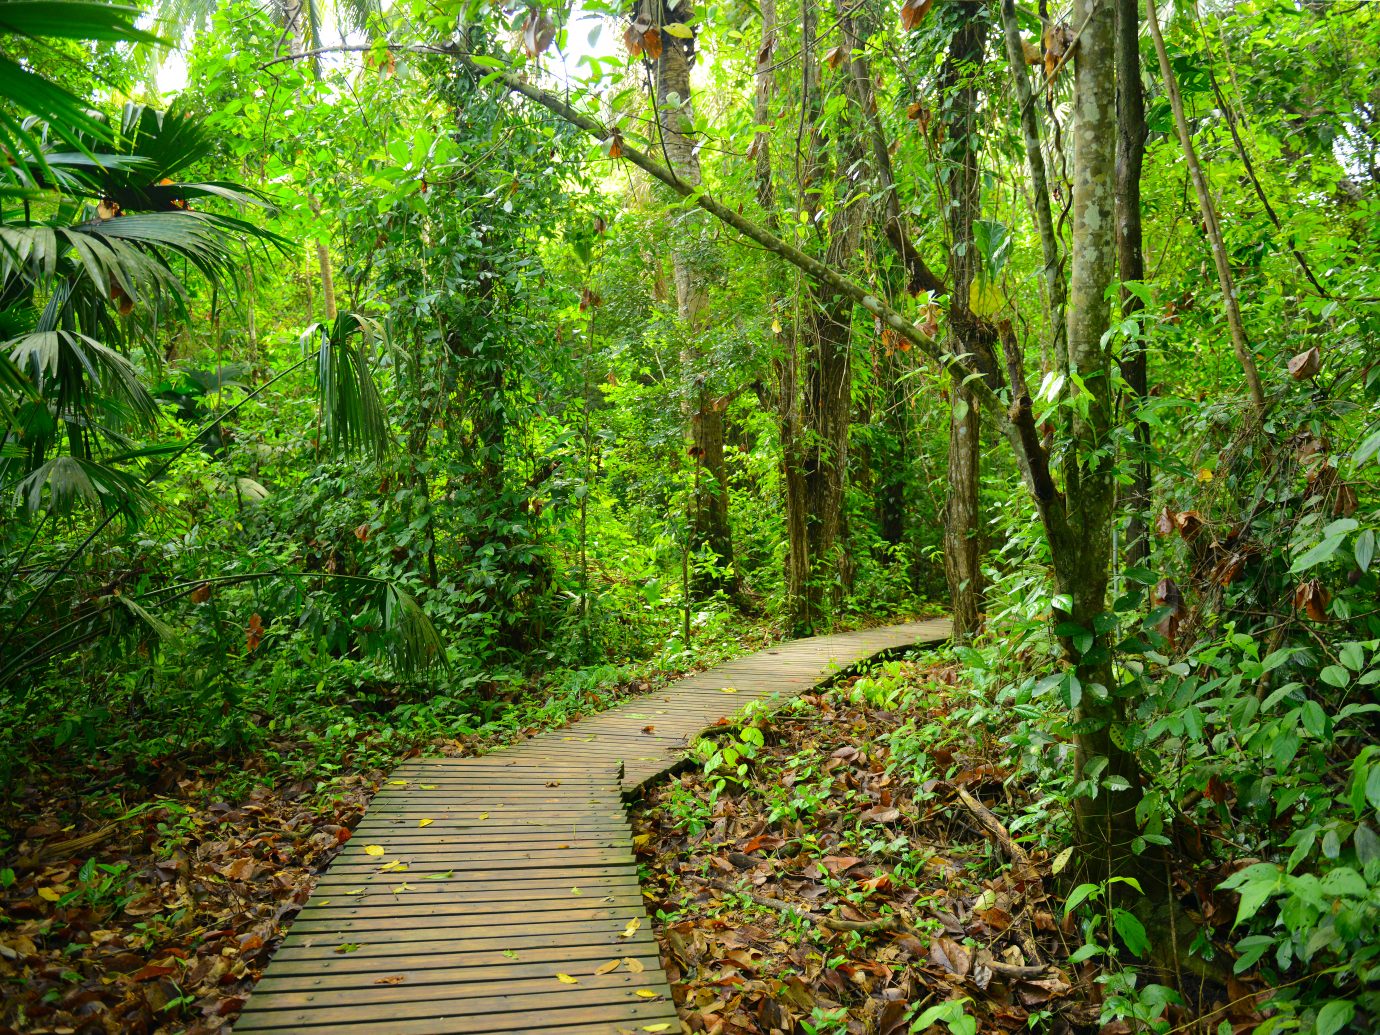 The walking way through the jungle in Tayrona National Park, Colombia.